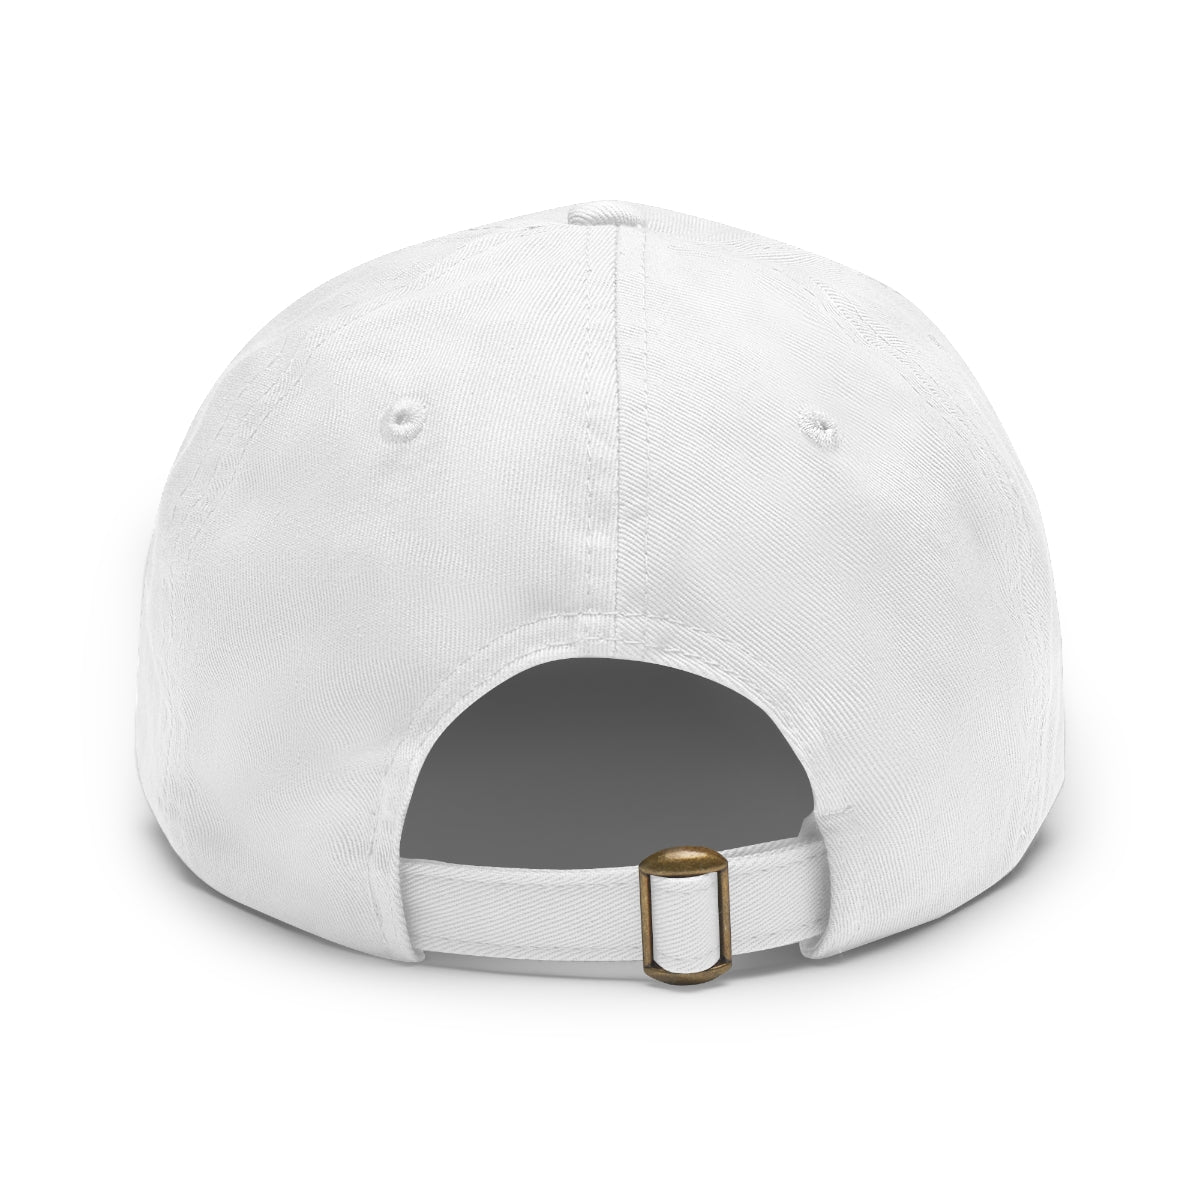 Retro UFO Dad Hat with Leather Patch